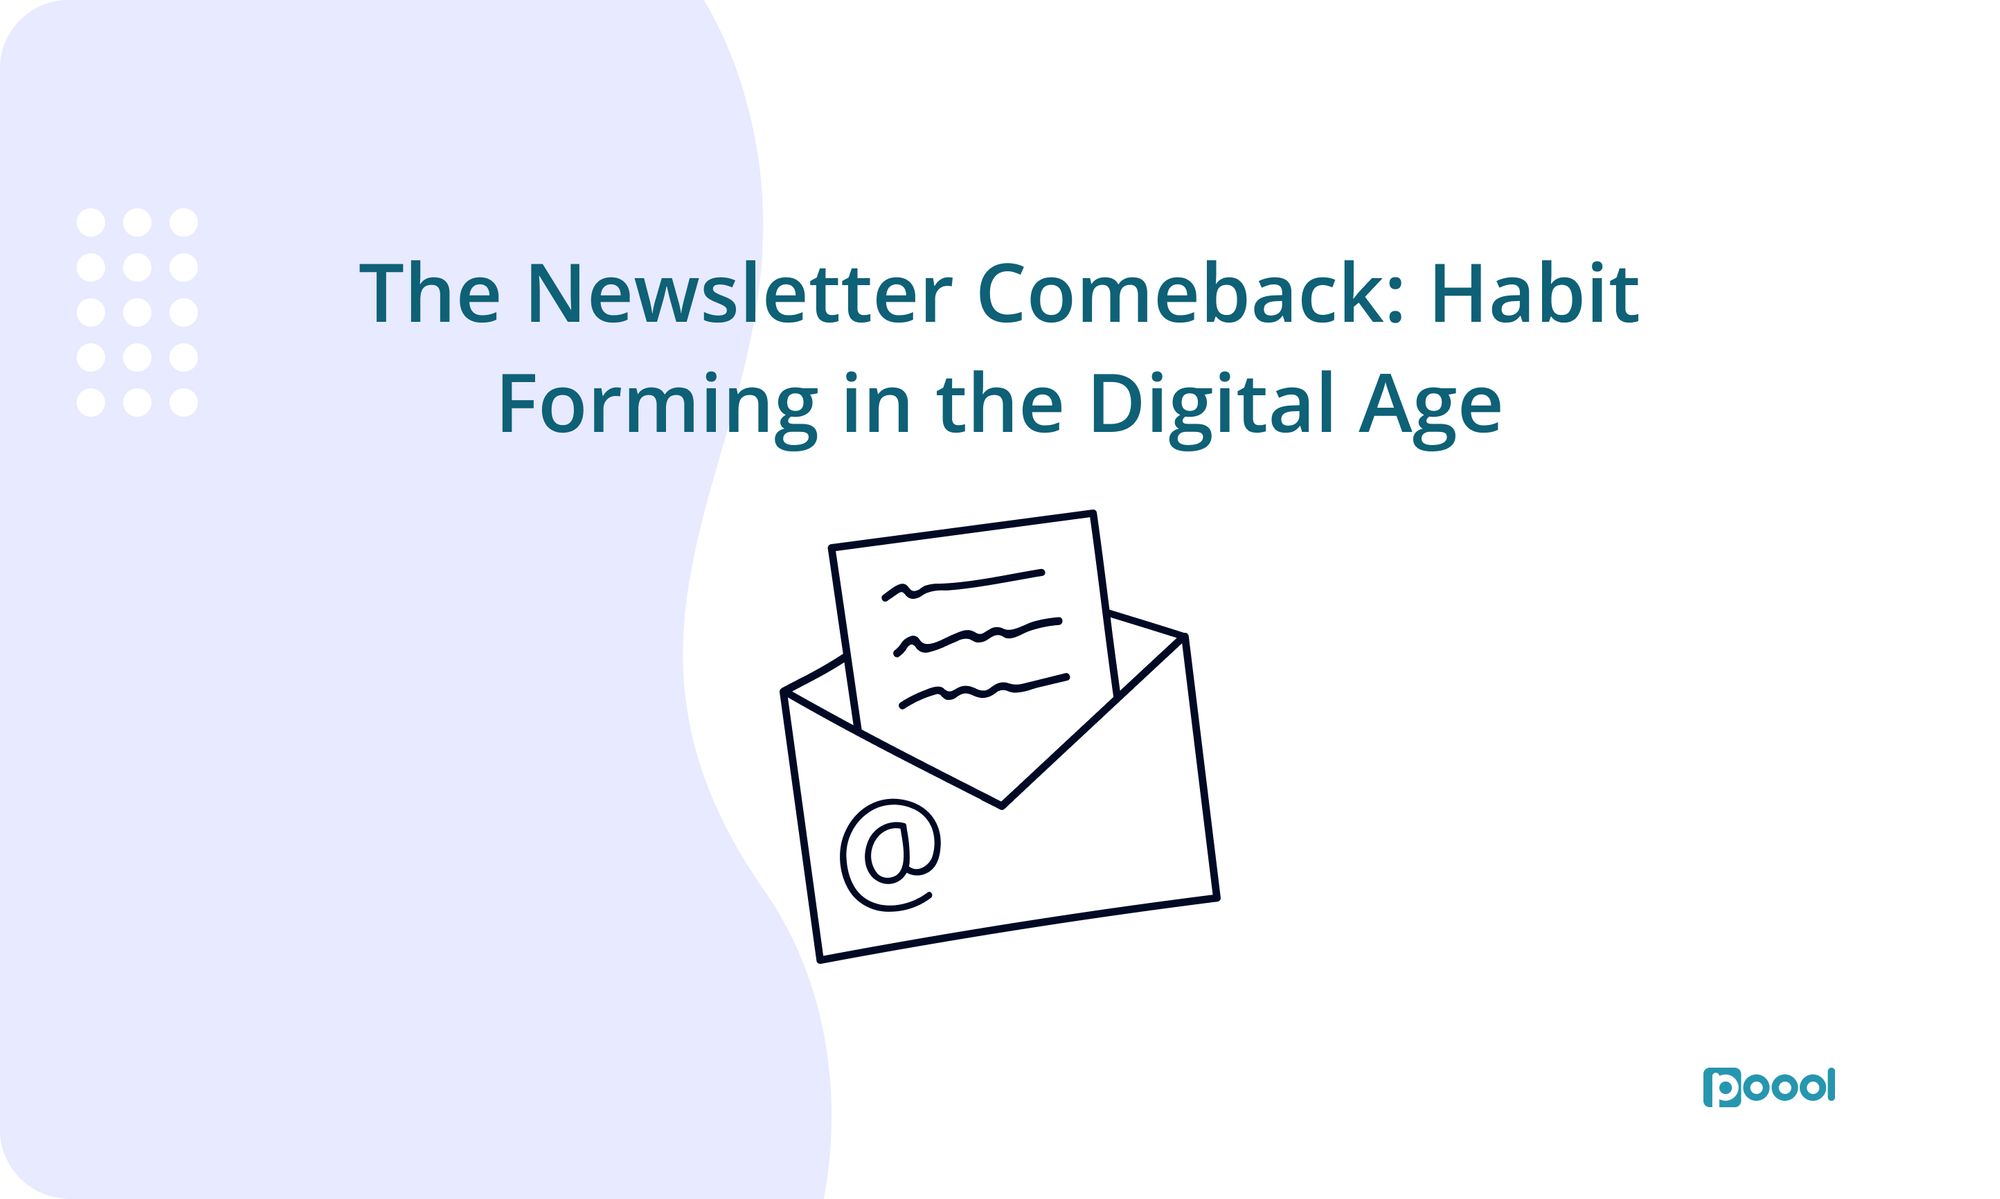 The Newsletter Comeback: How to Form Habits in the Digital Age.